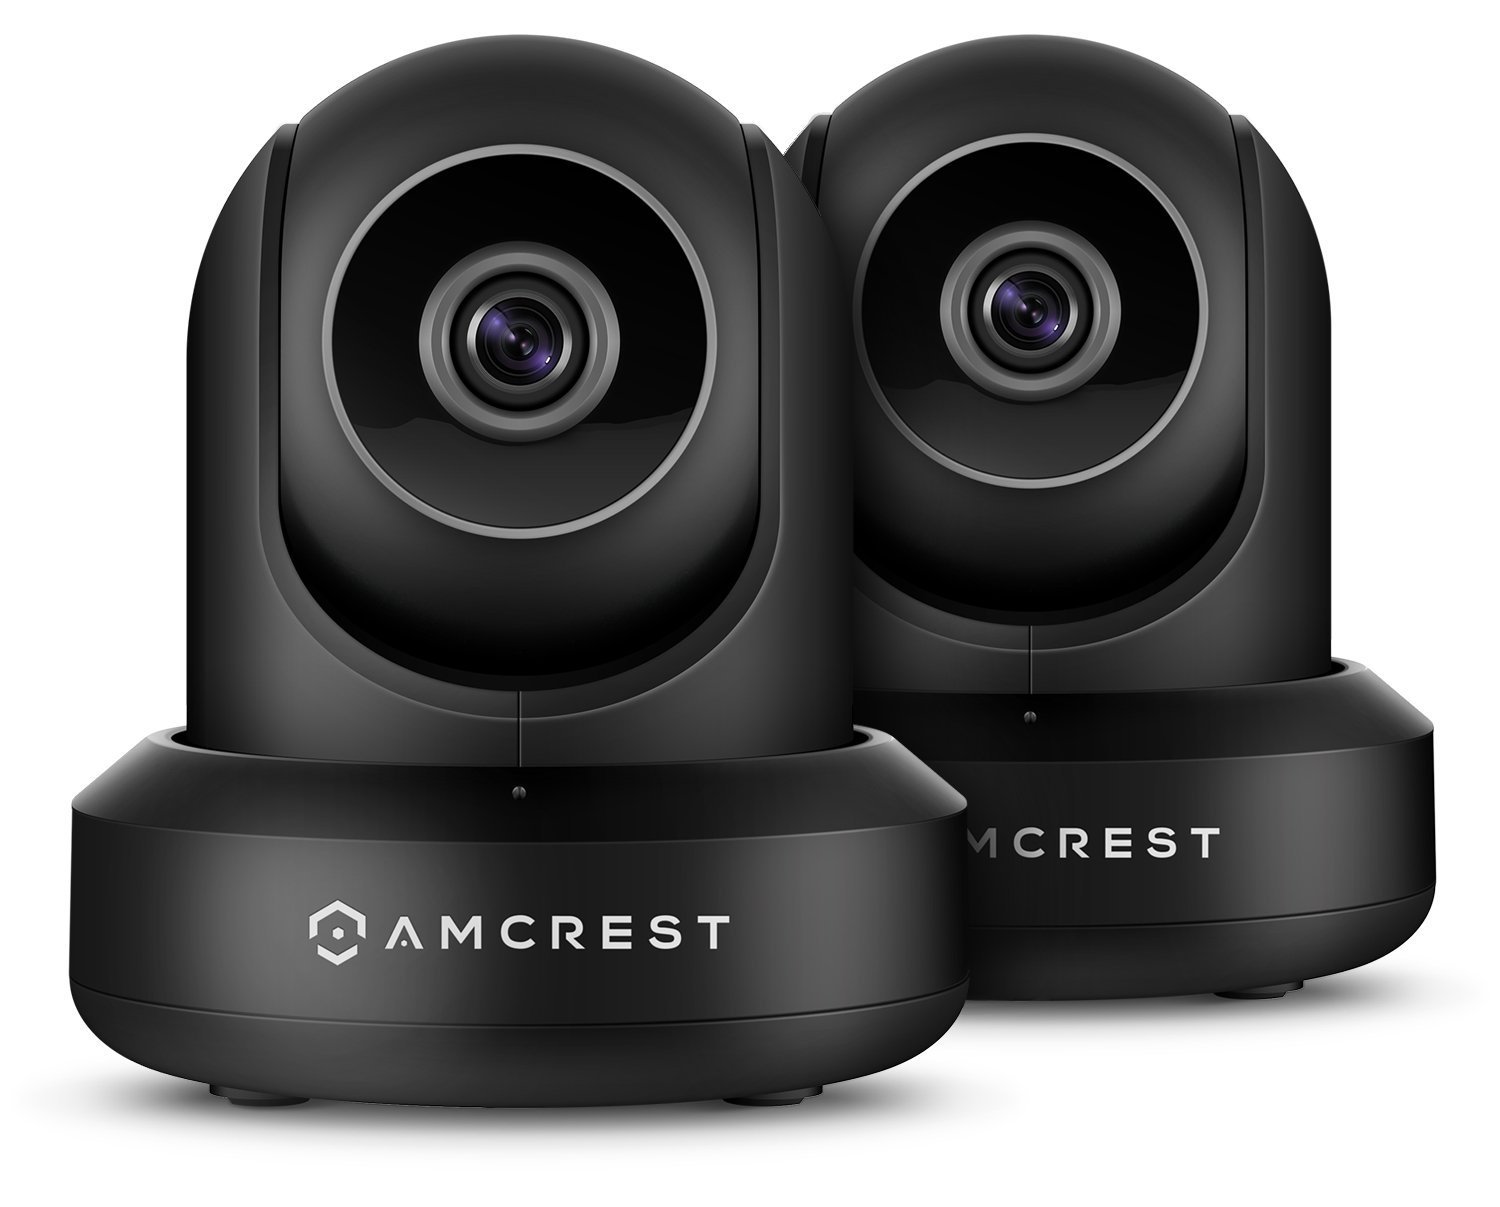 2-pack Amcrest ProHD 1080p Wi-Fi IP wireless security cameras for $100